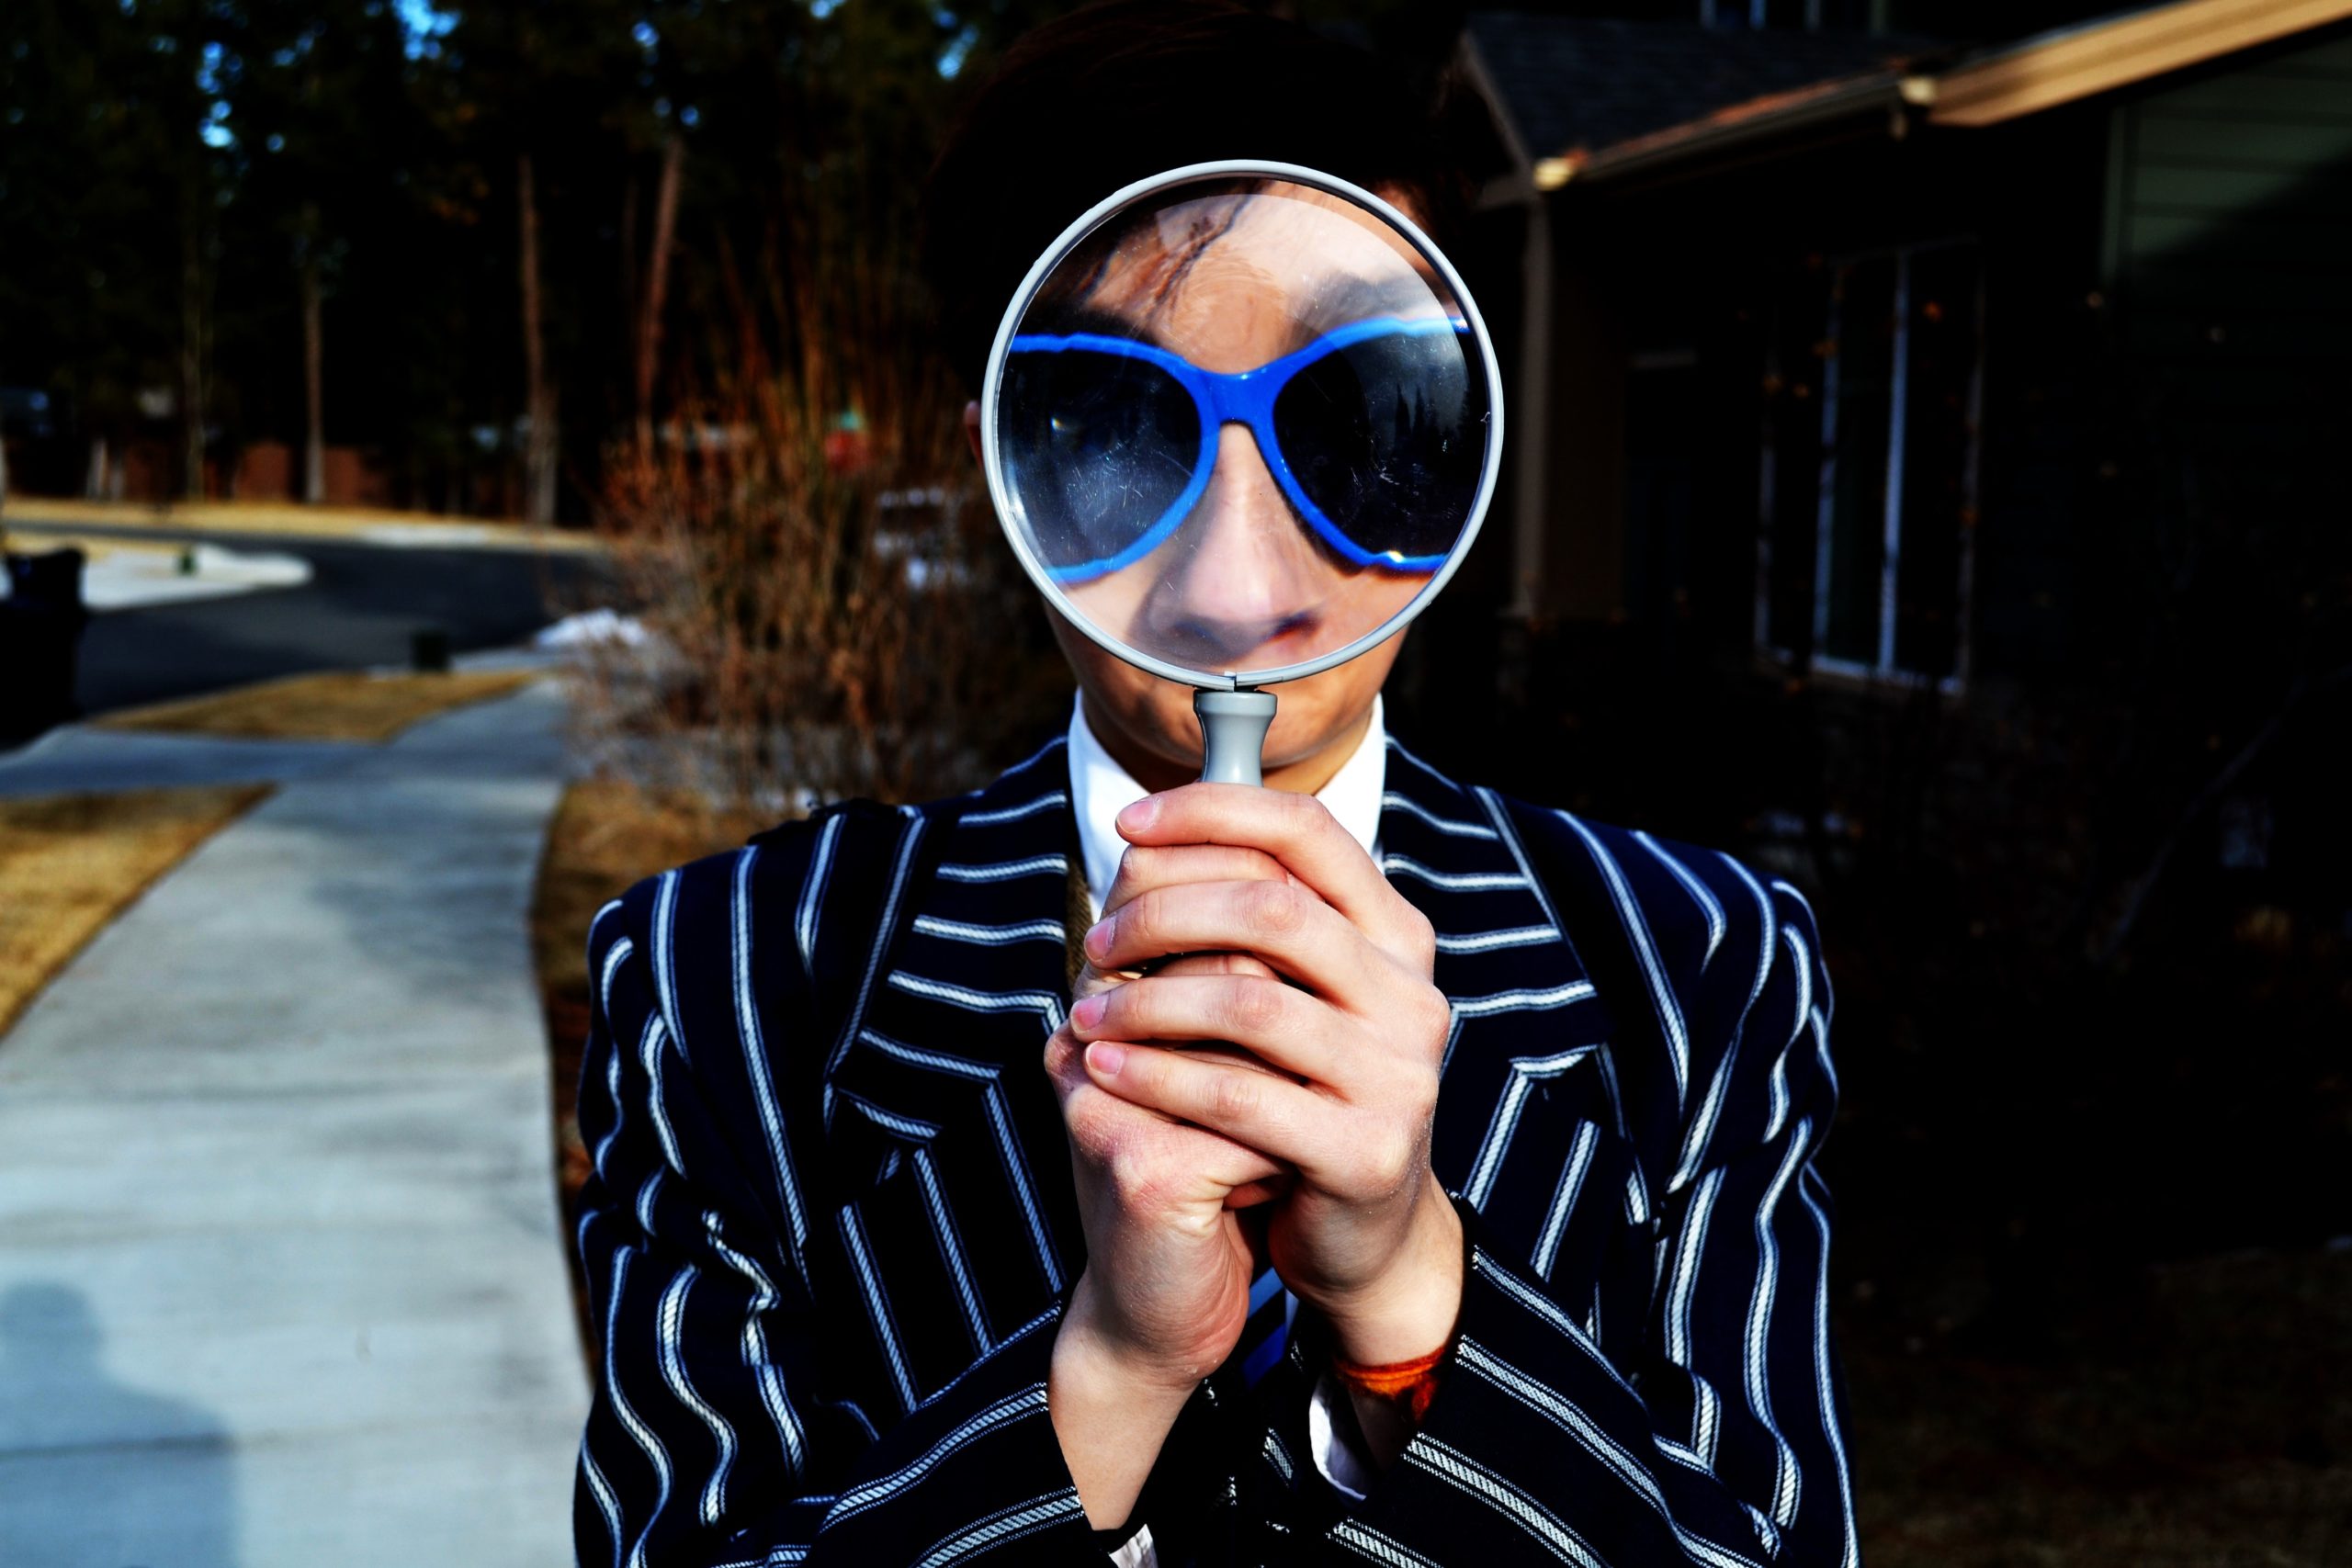 Man in a suit holding magnifying glass up to his face